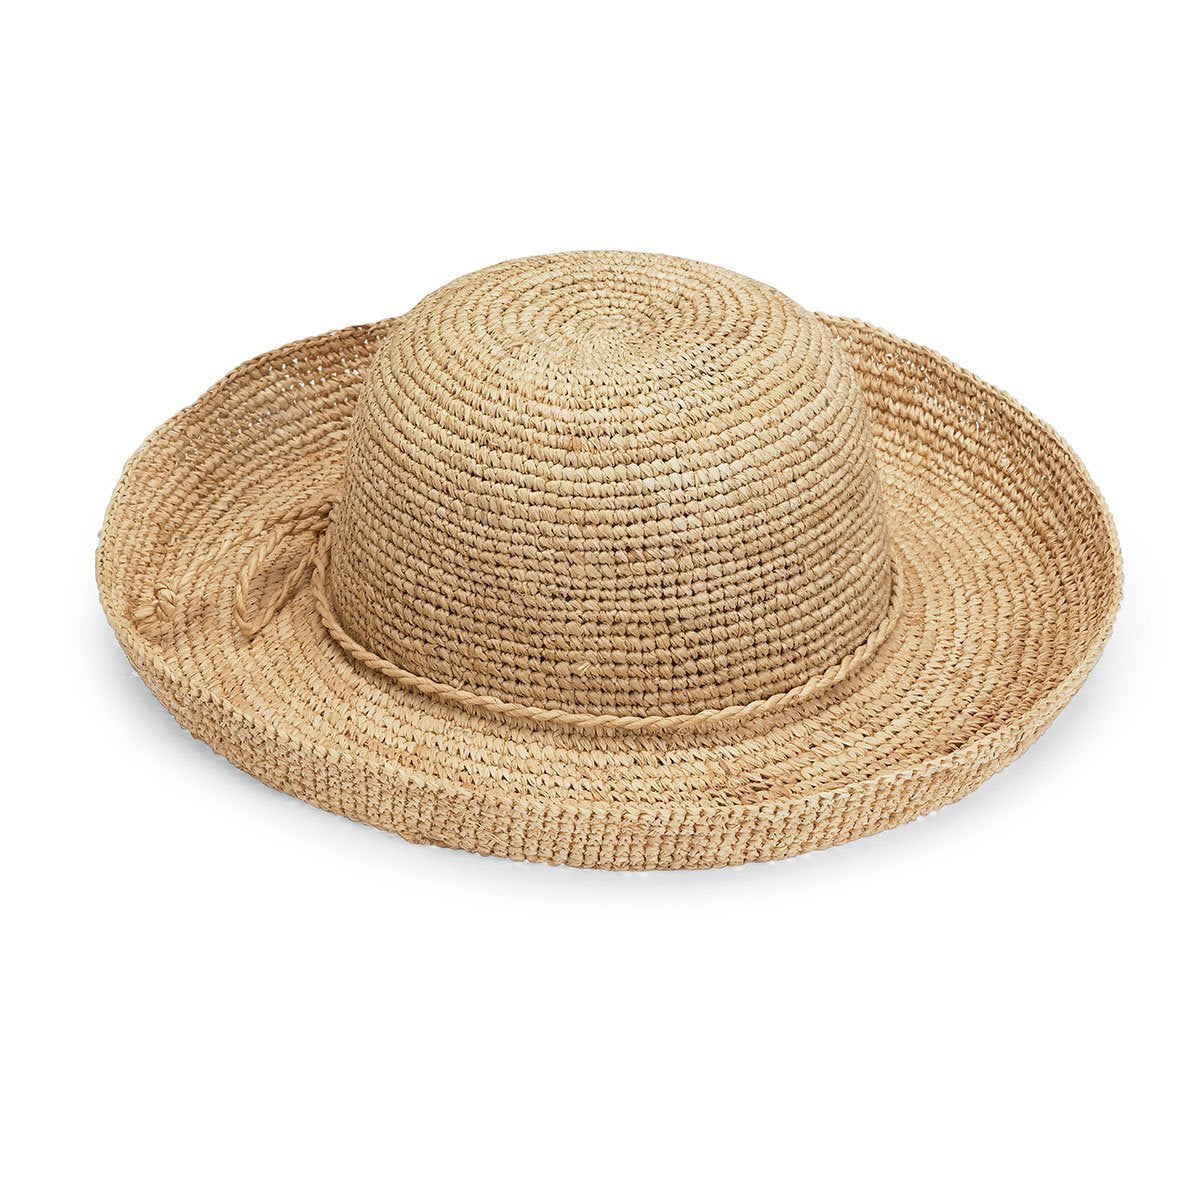 Featuring Angled View of the Catalina Natural Raffia Wide Brim Crown Style Sun Hat in Natural from Wallaroo